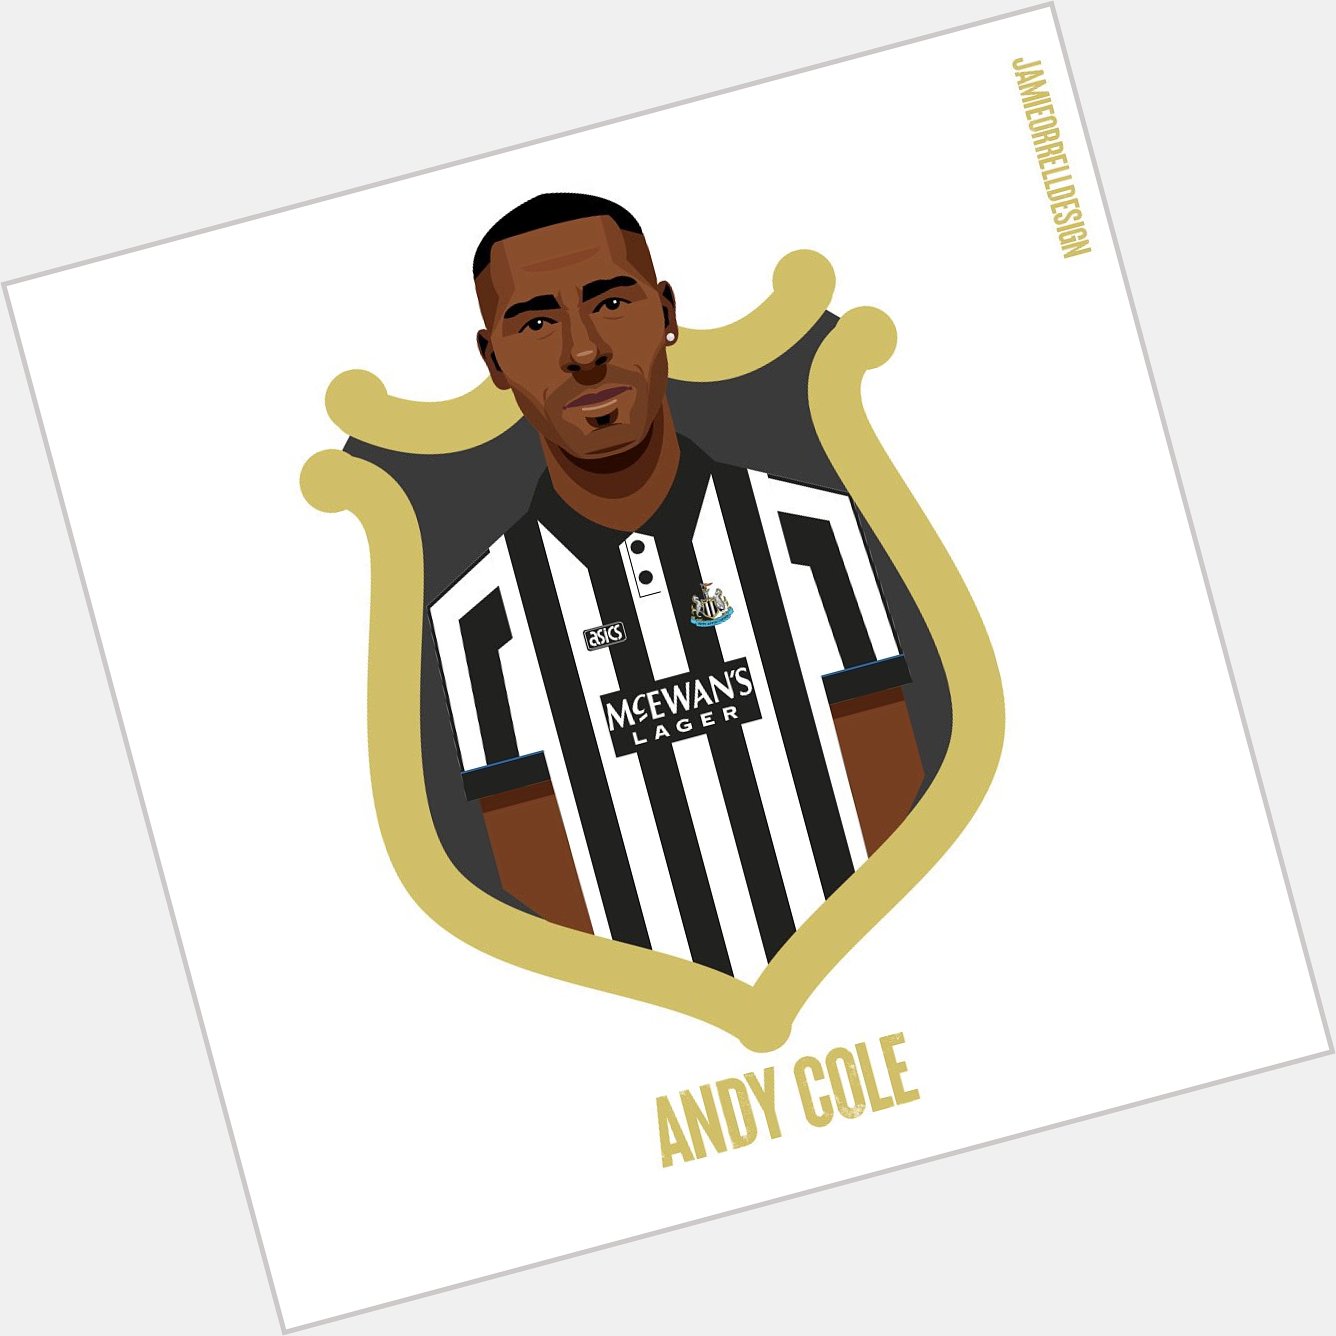  He gets the ball, he scores a goal, Andy Andy Cole! Happy Birthday   